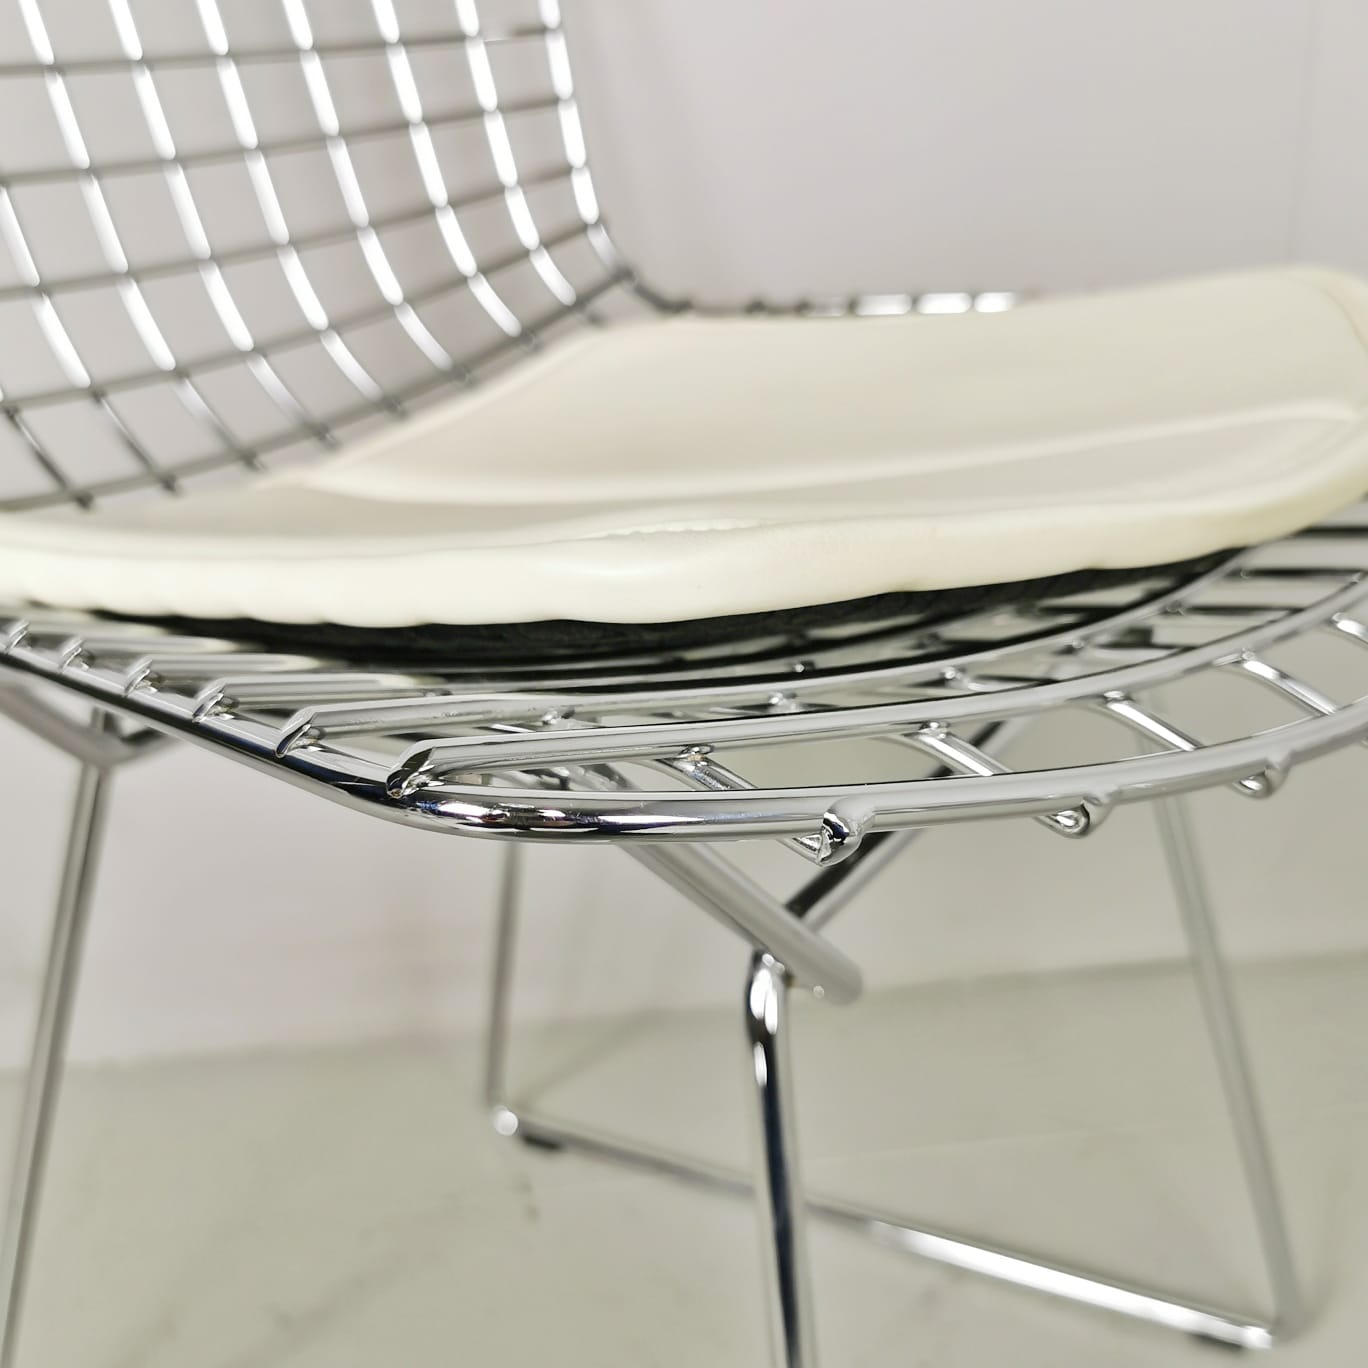 4 Harry Bertoia chairs for Knoll in leather